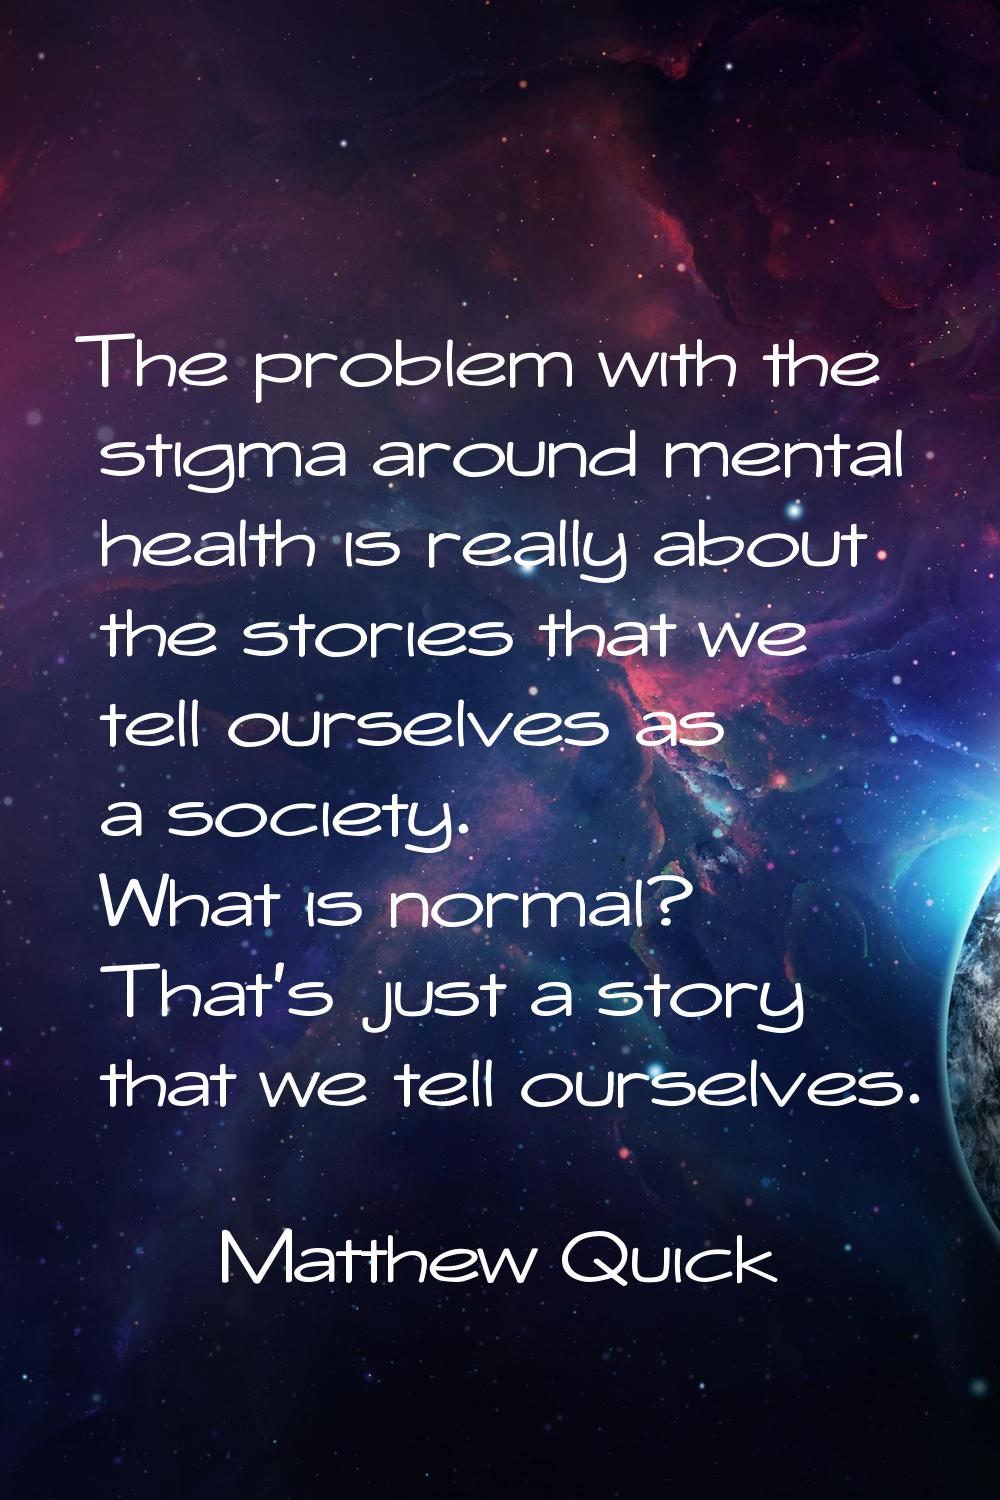 The problem with the stigma around mental health is really about the stories that we tell ourselves